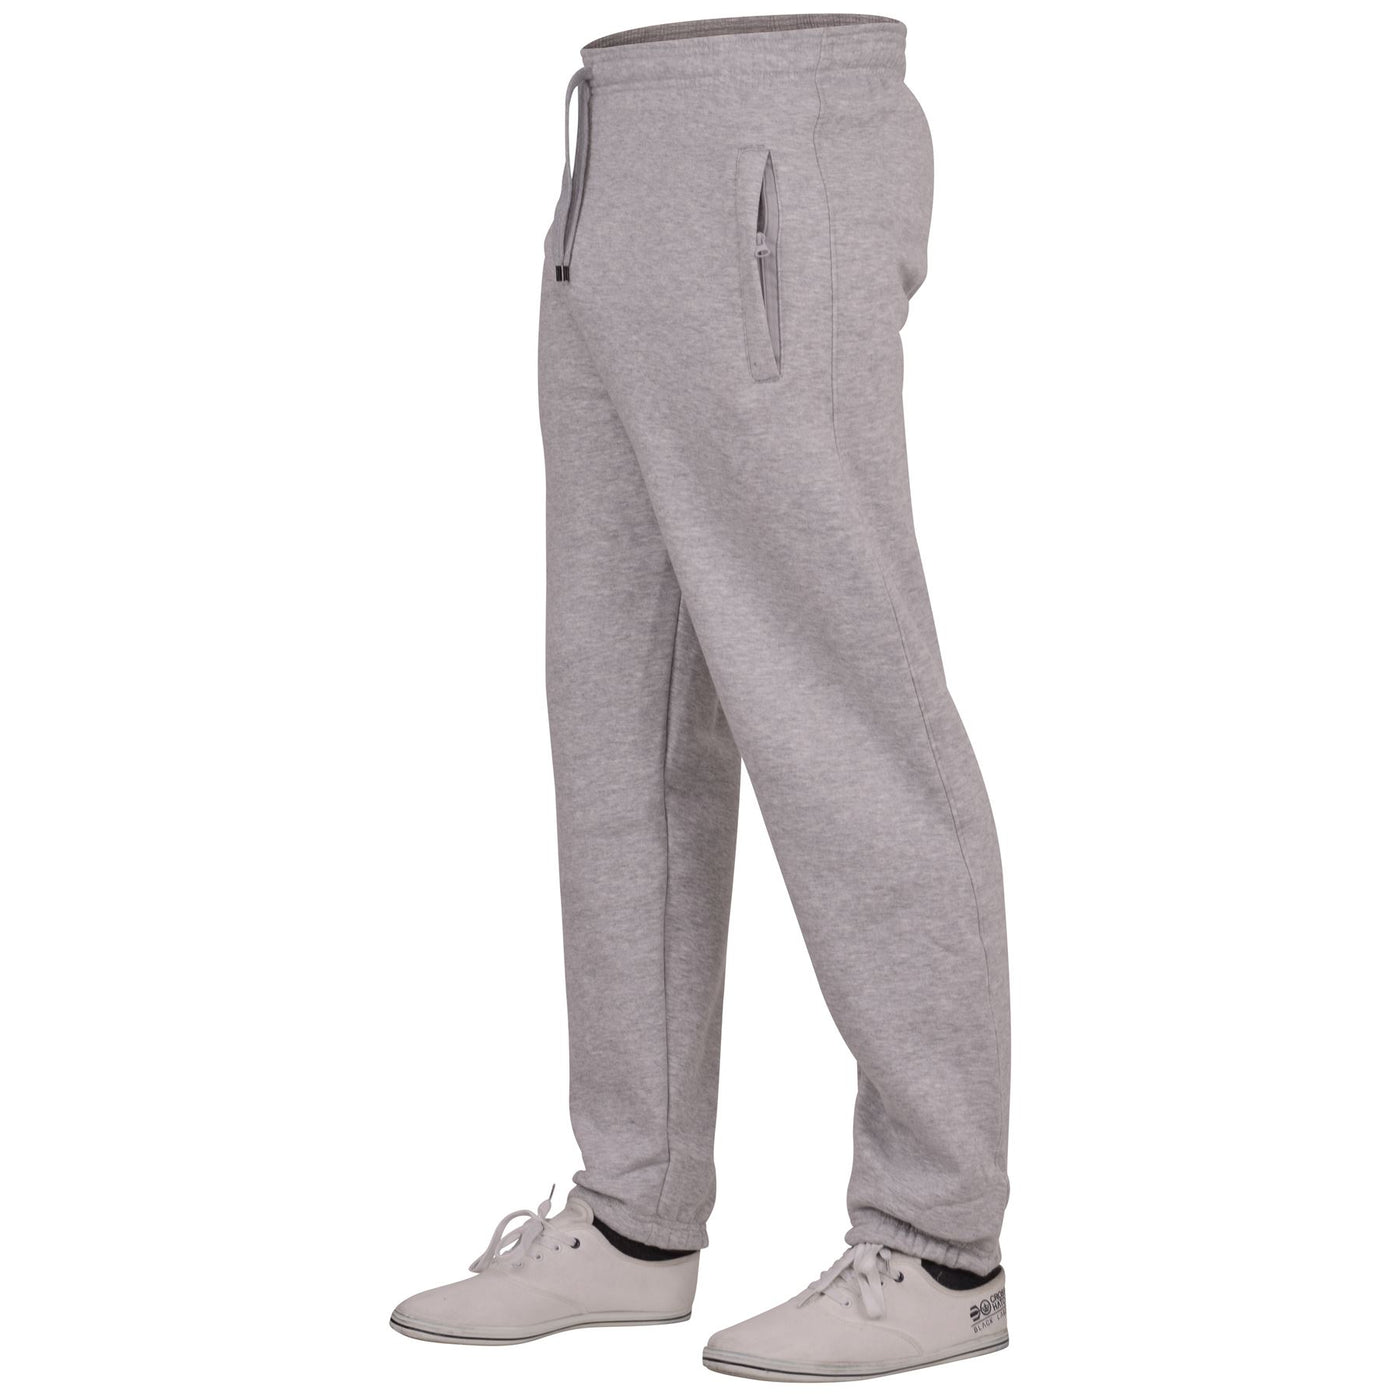 Spindle Mens Plain Jogging Bottoms with Zip Pockets Heavy Duty Fleece Round Neck Trousers